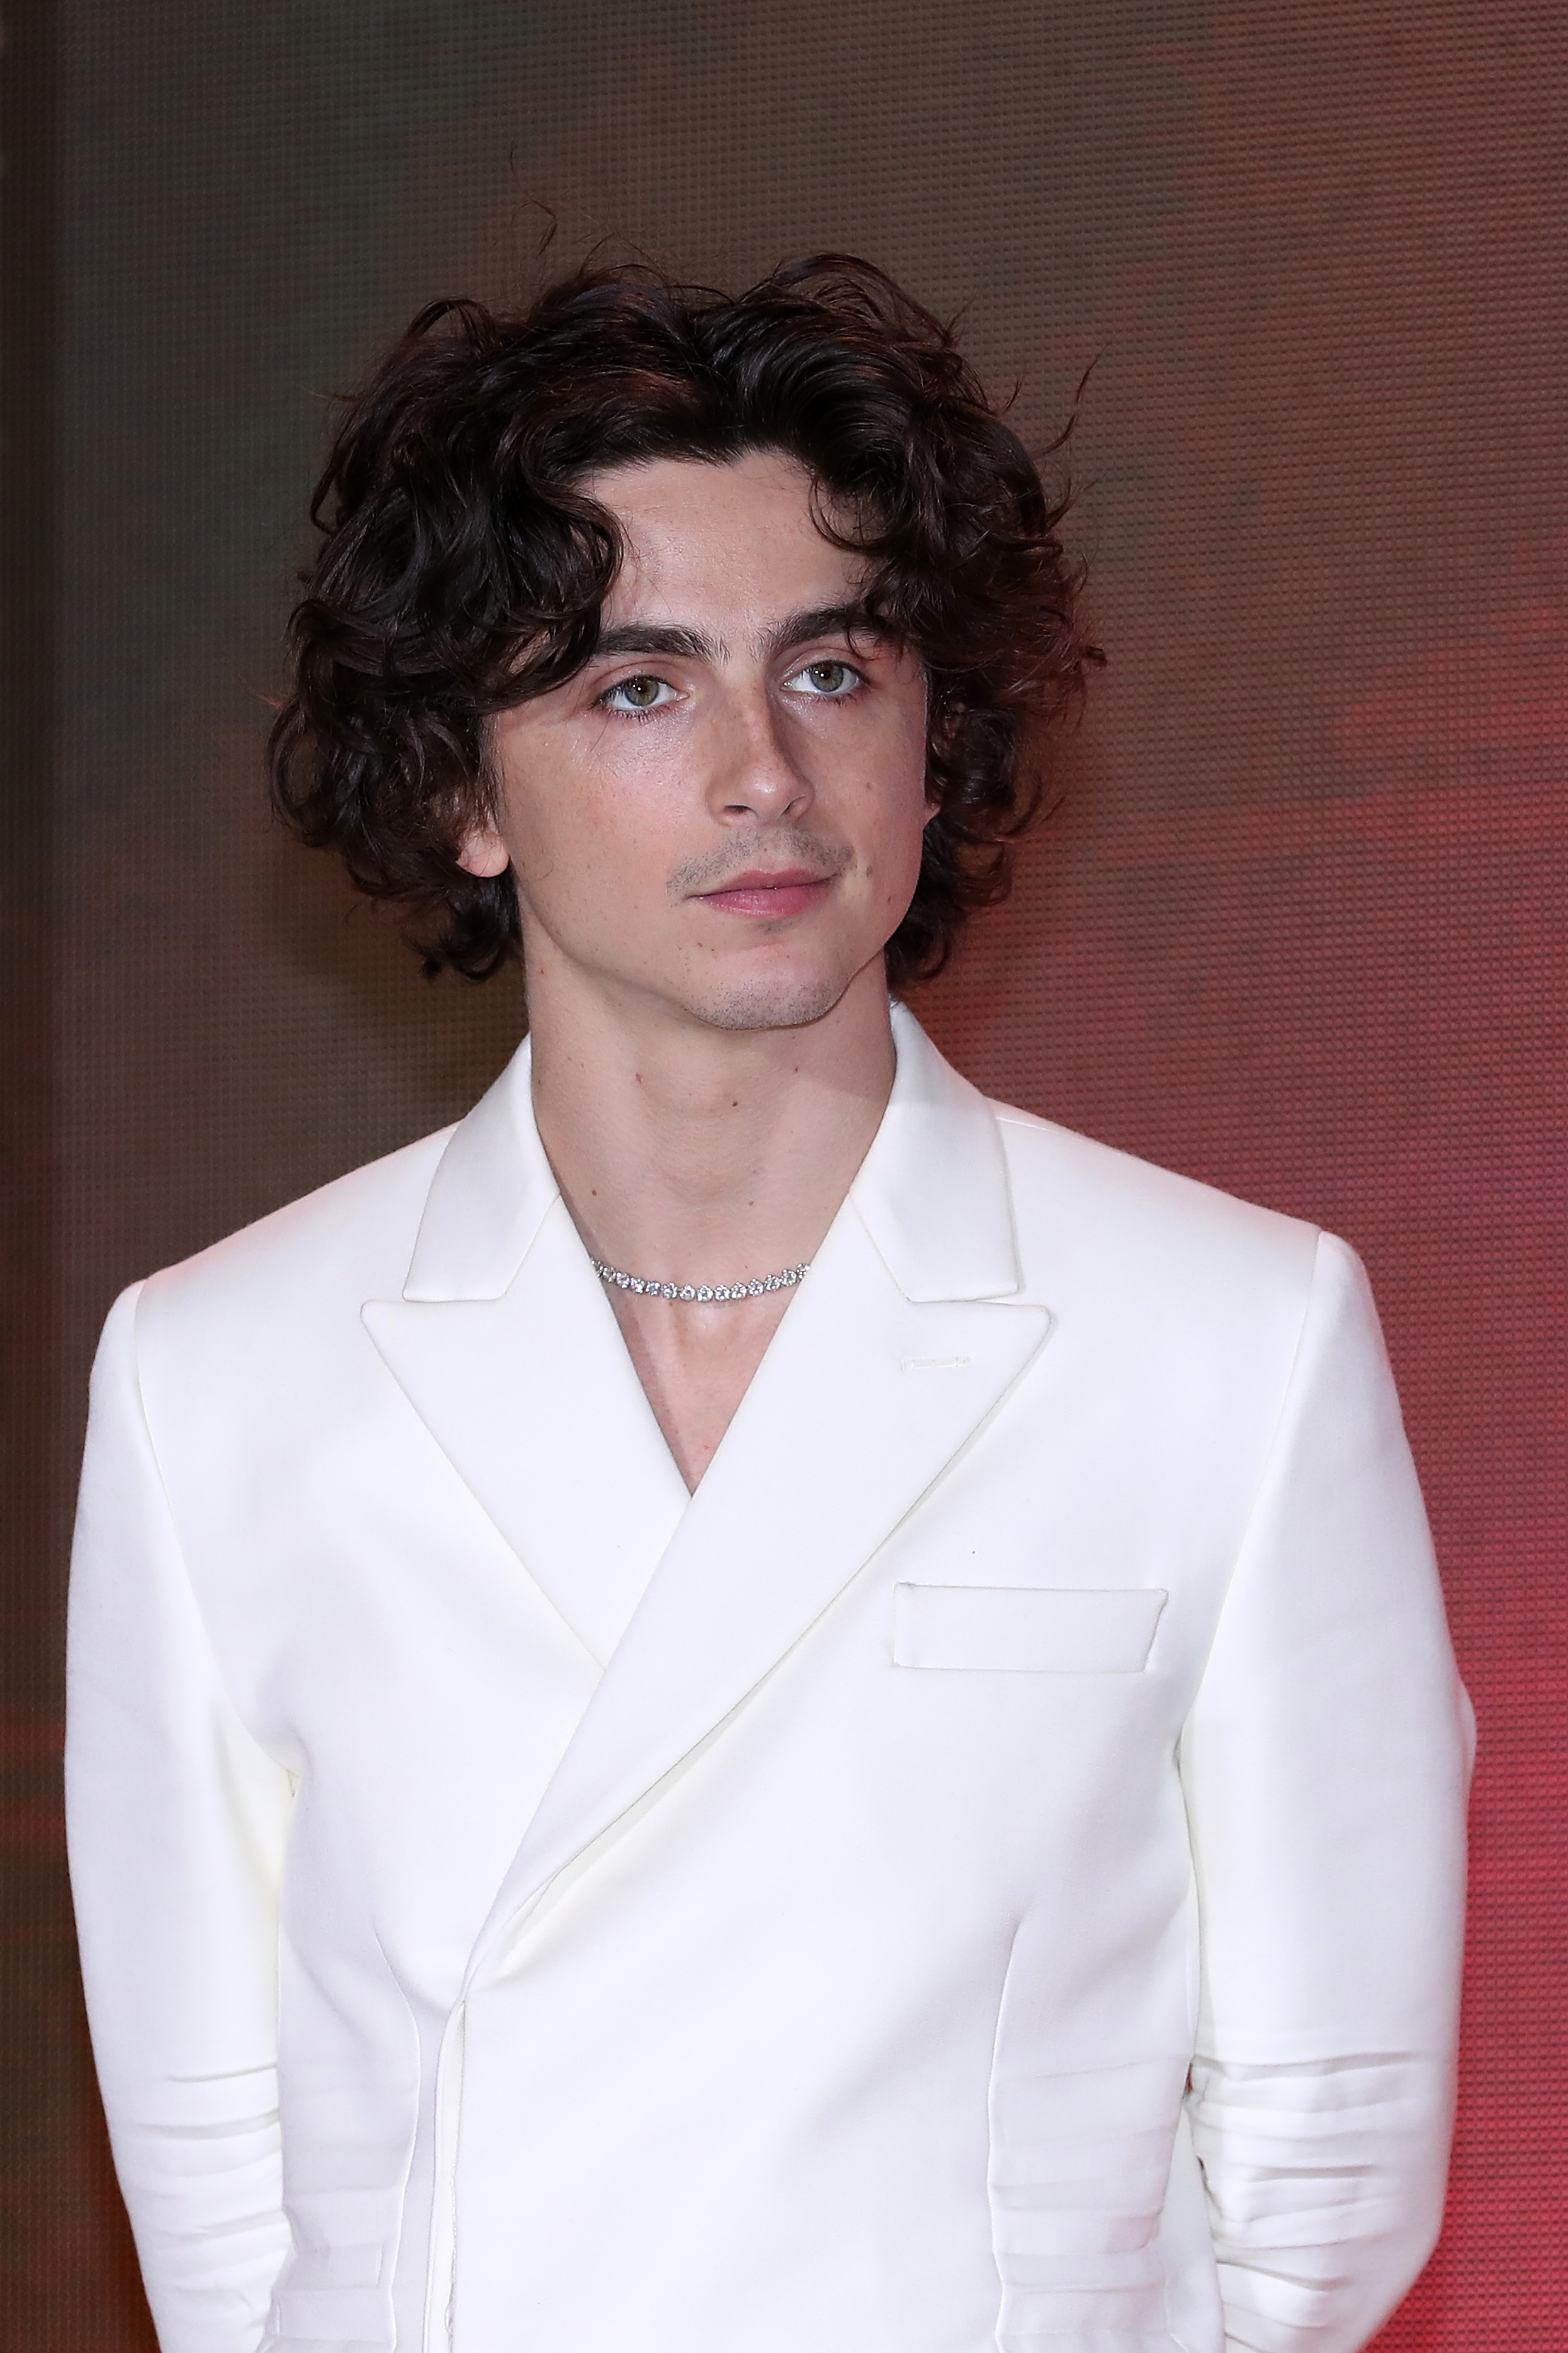 Kylie has been dating Timothee for nearly a year, however, fans have recently been speculating a breakup between the stars